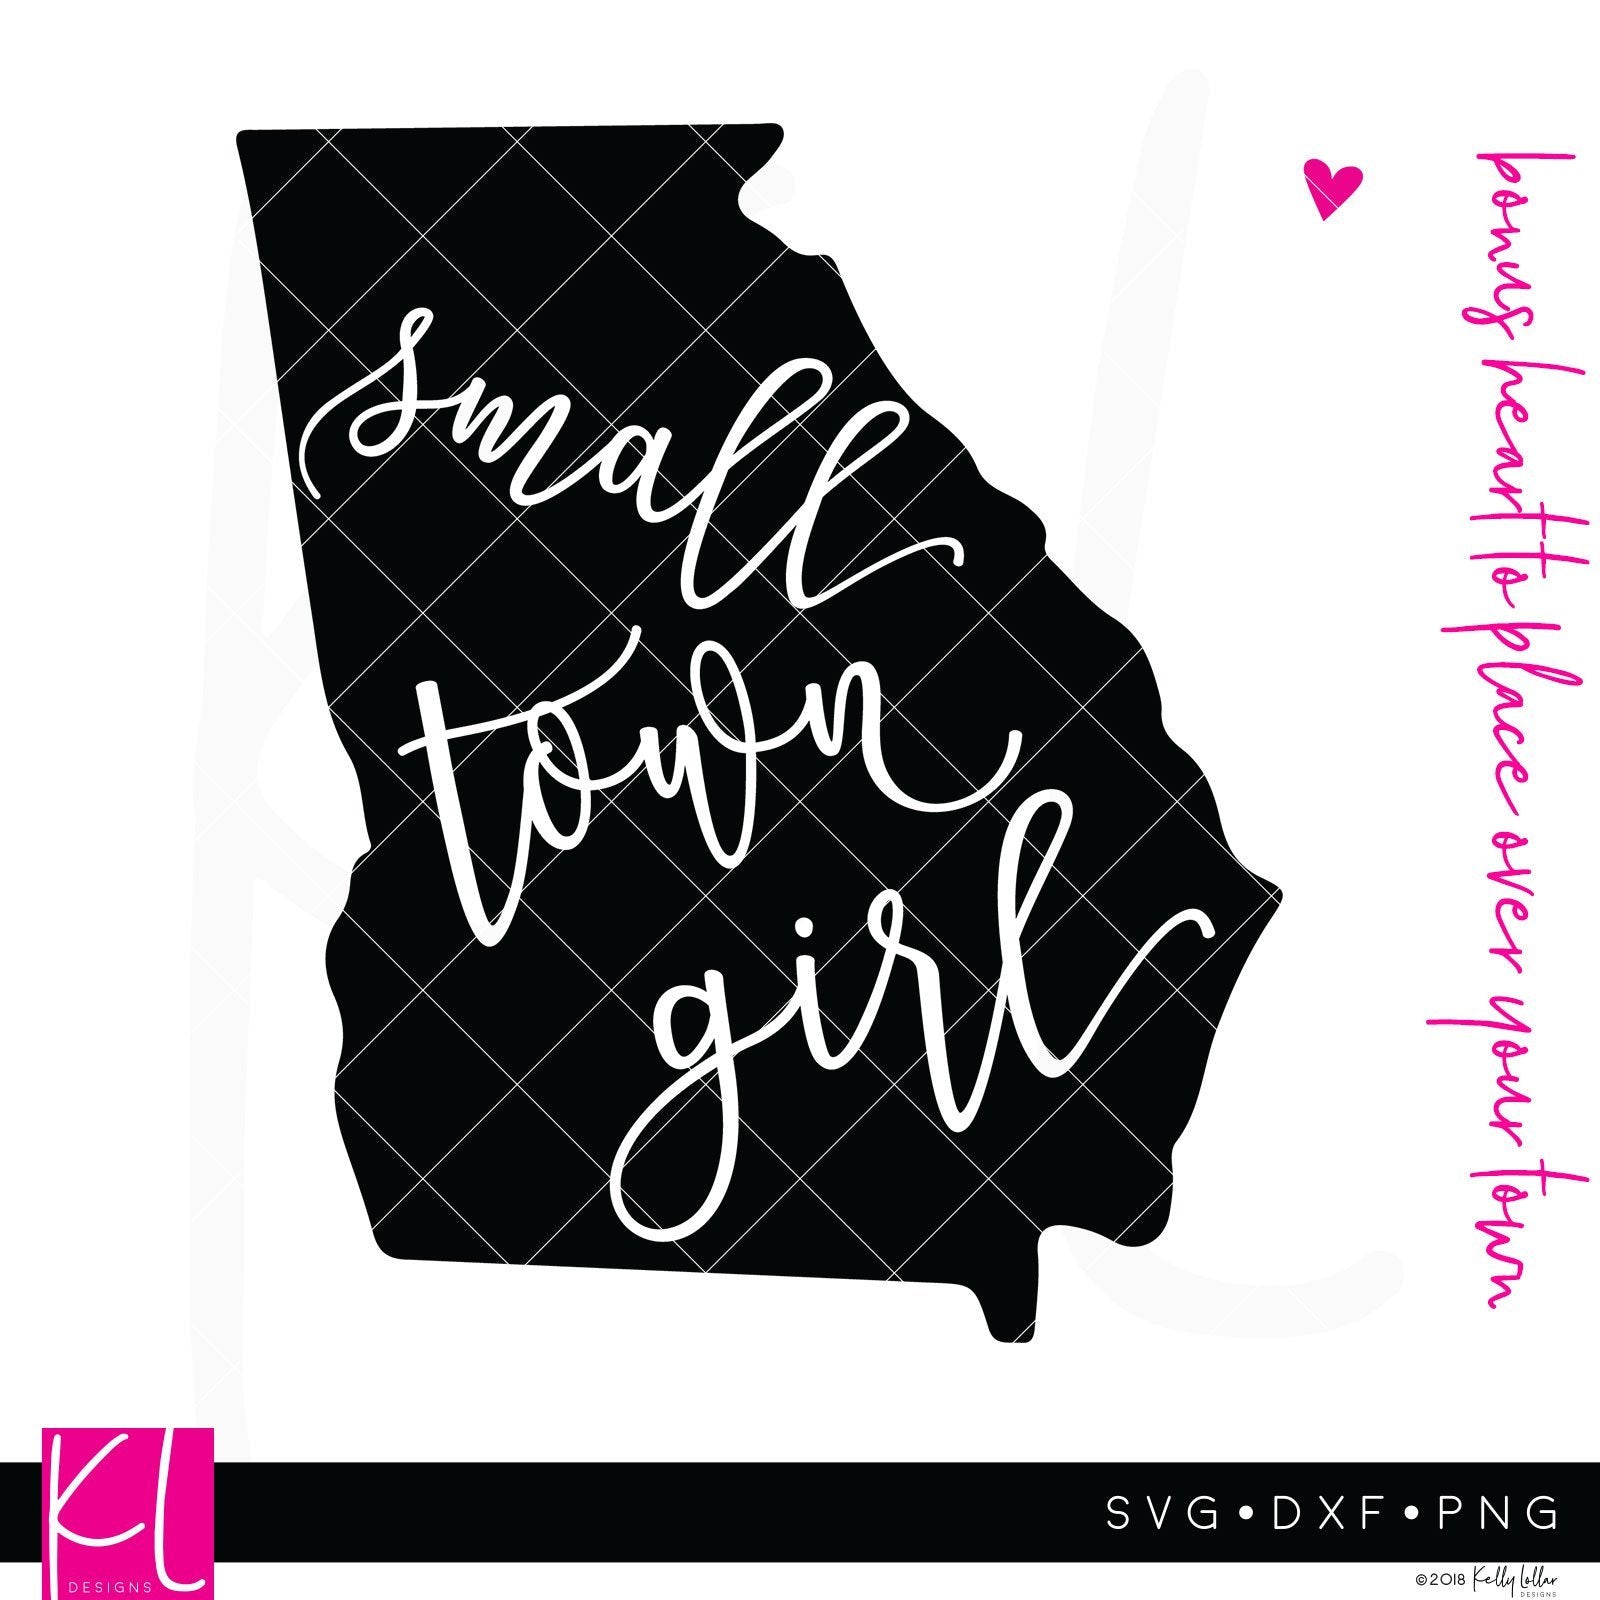 Download Small Town Girl Georgia So Fontsy